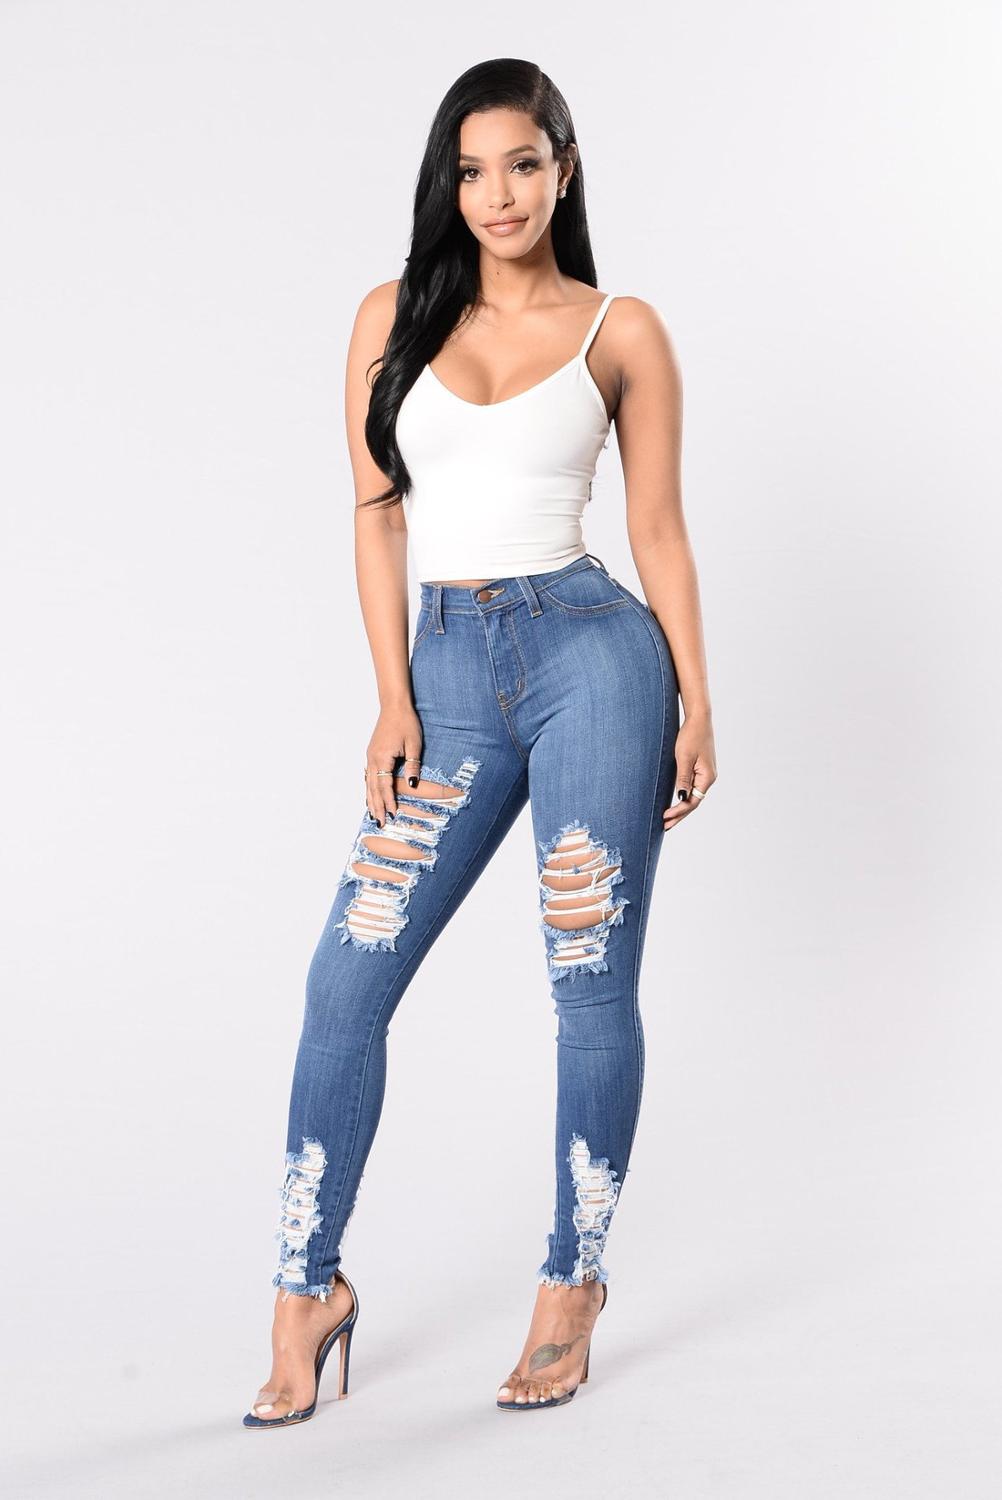 Hot sale woman ripped jeans fashion trendy high waist jeans casual skinny slim denim pencil pants S-3XL Top quality new arrival